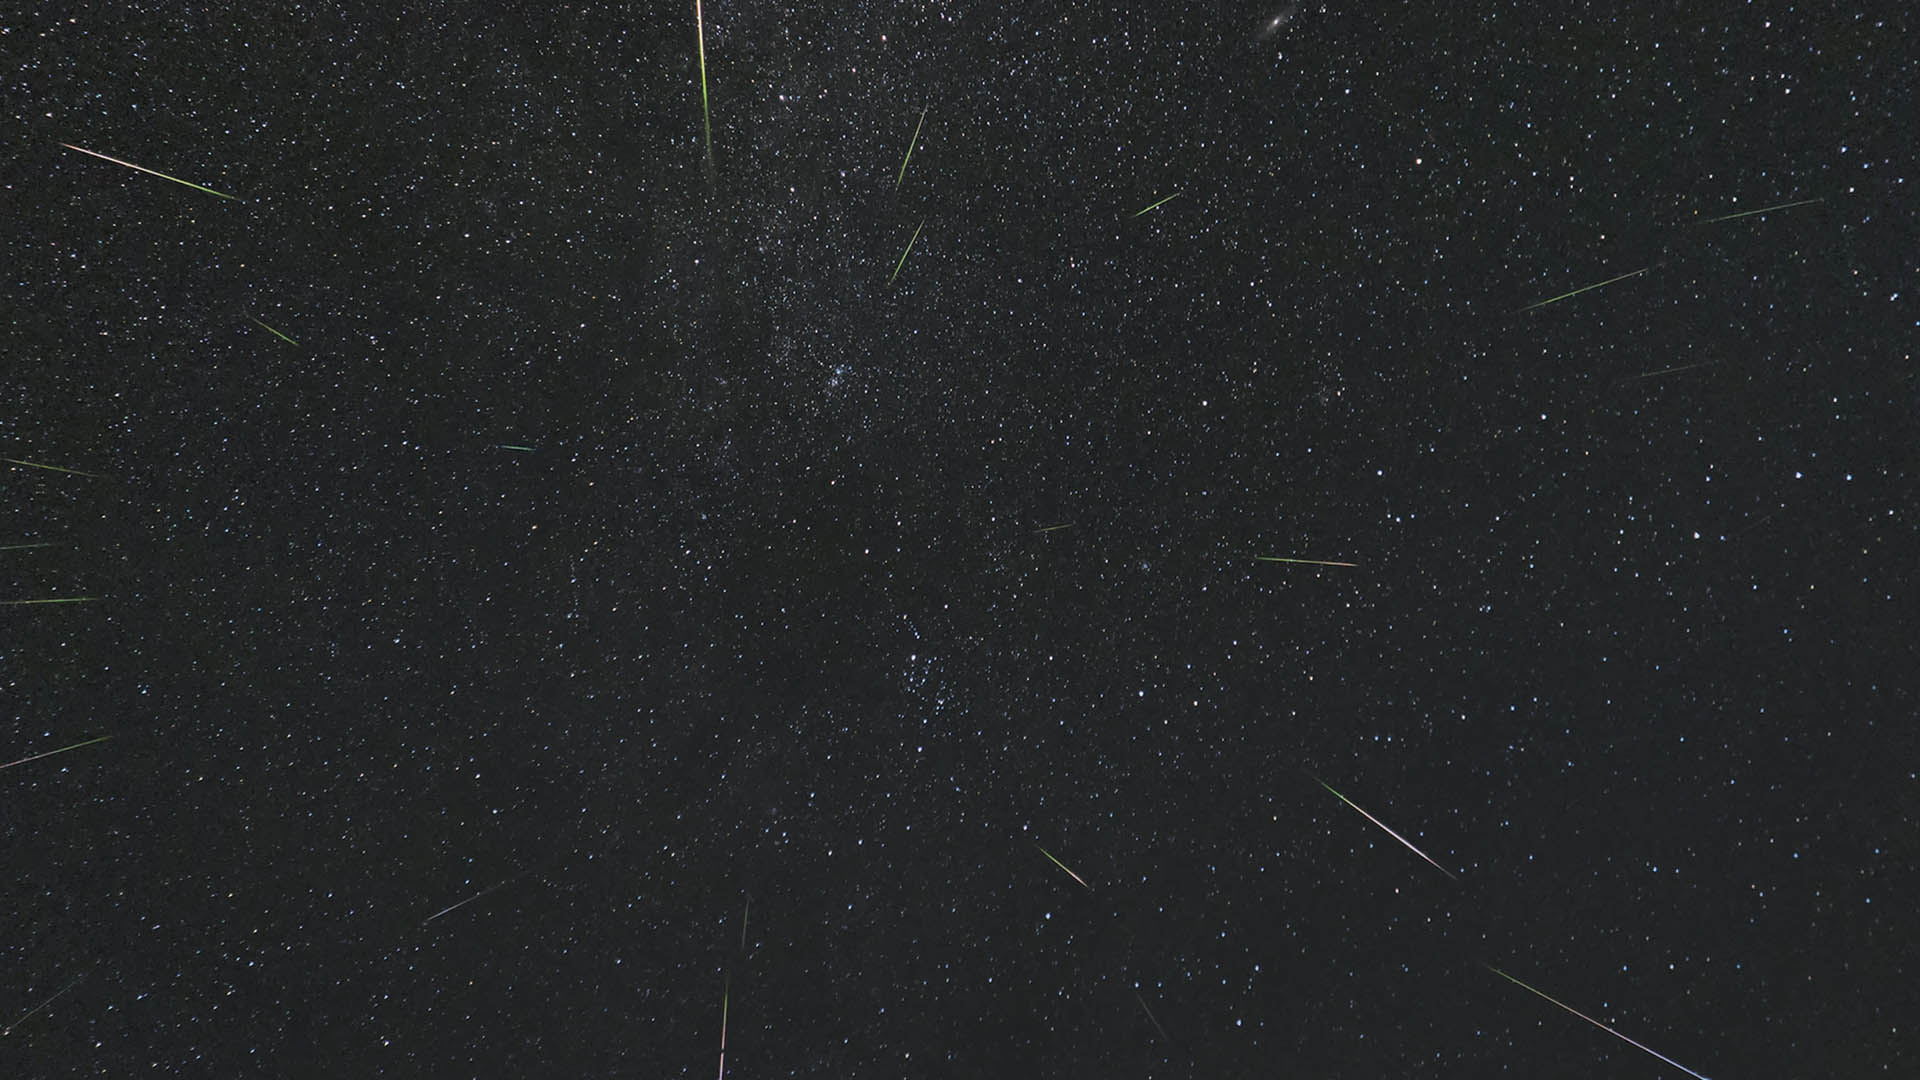 The Perseids – here in a photograph from 2016 – are volunteering themselves for photography experiments this year. Image data: Leica D-Lux (type 109) at ISO 1600, 24mm focal length. Michael Schmidt